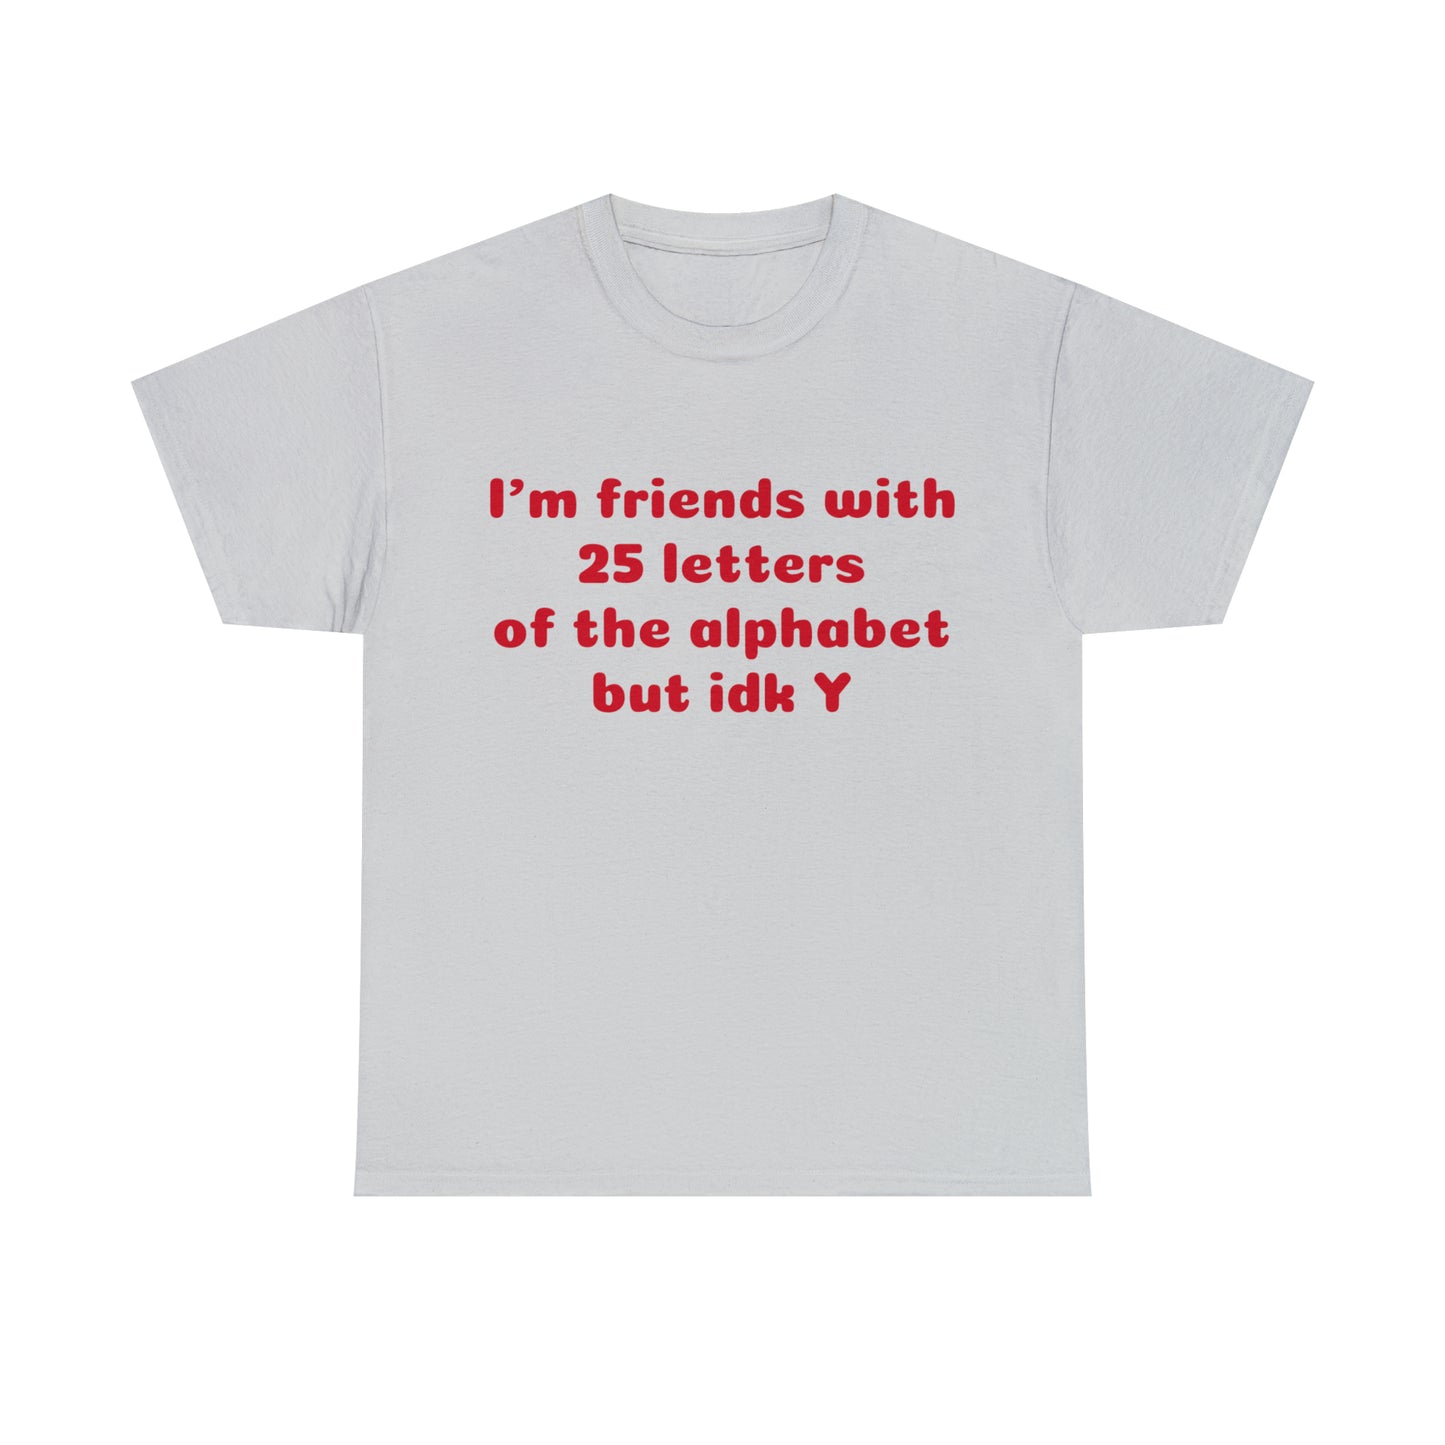 Custom Parody T-shirt, Im friends with 25 letters of the alphabet, but idk Y shirt design